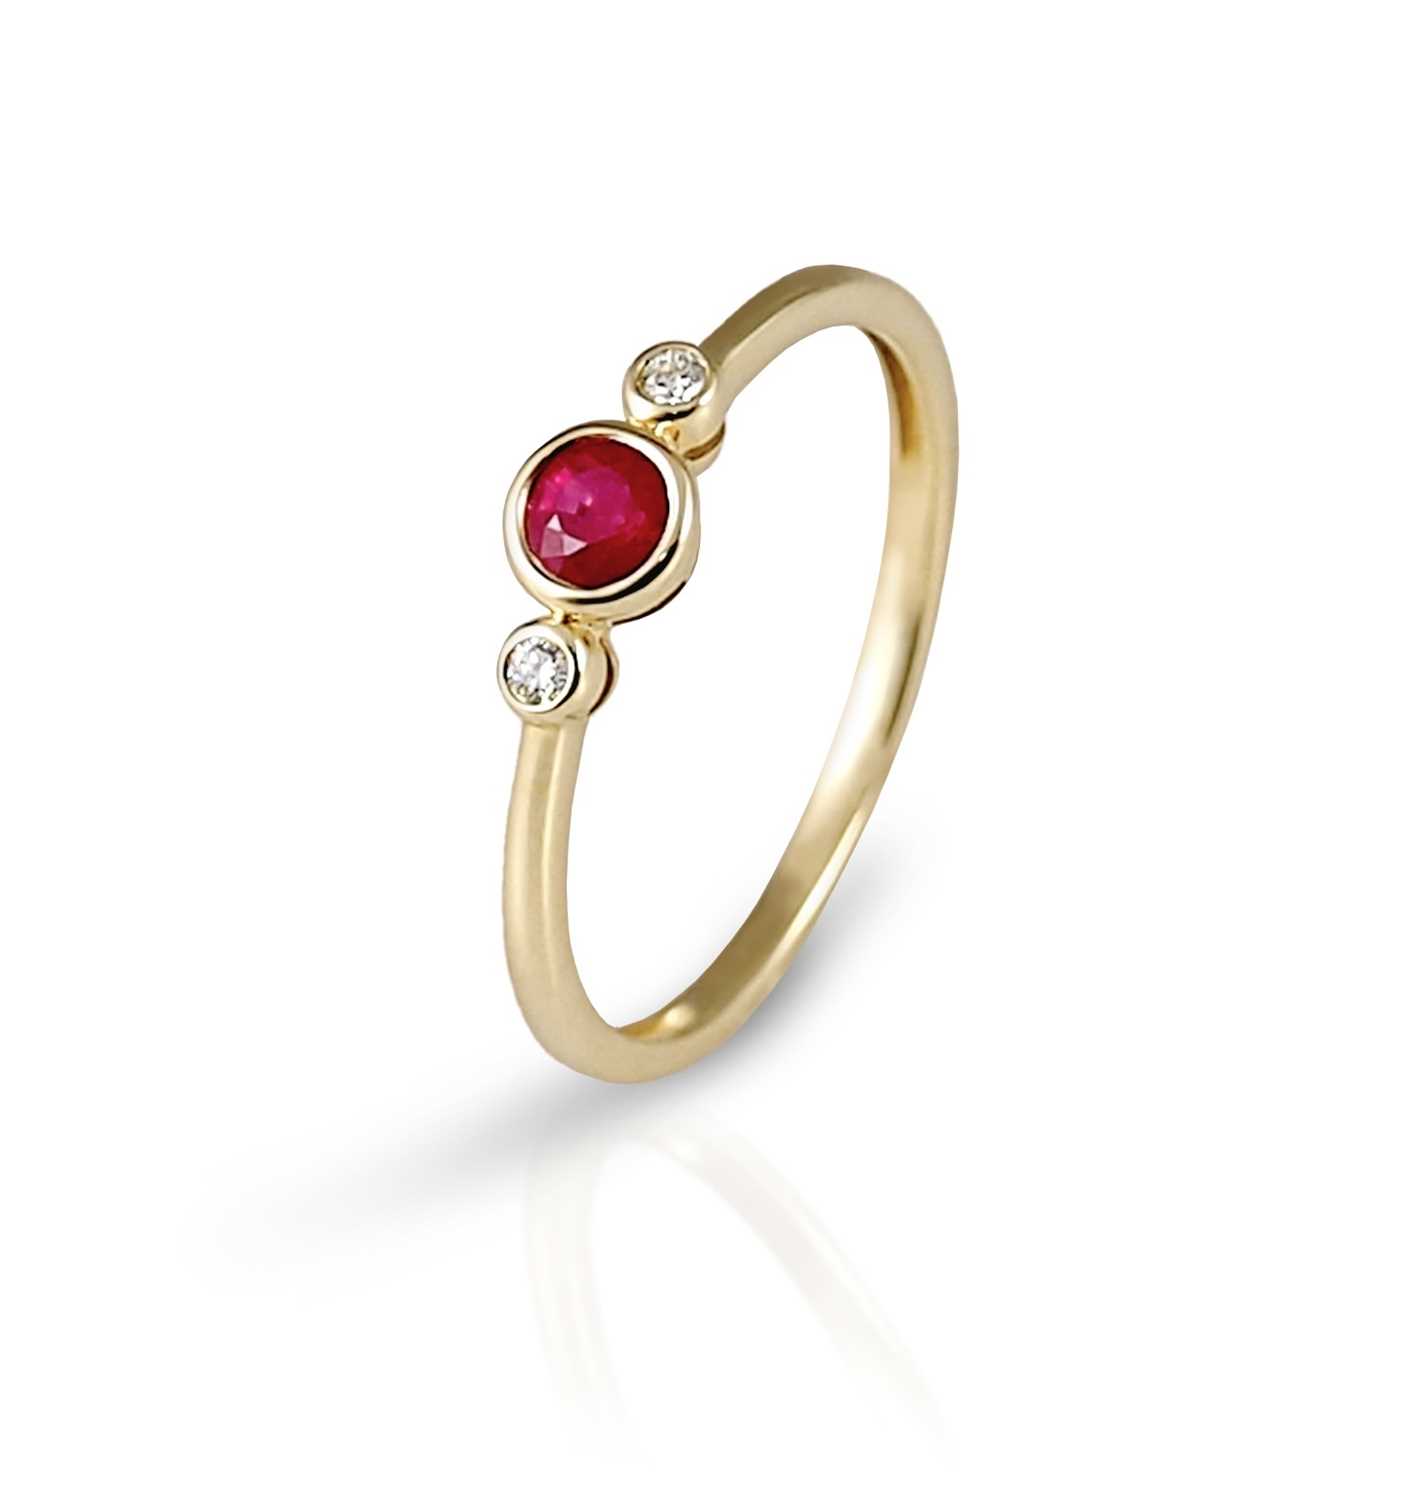 Lot 558 - 14K Gold Ruby and Diamond Ring